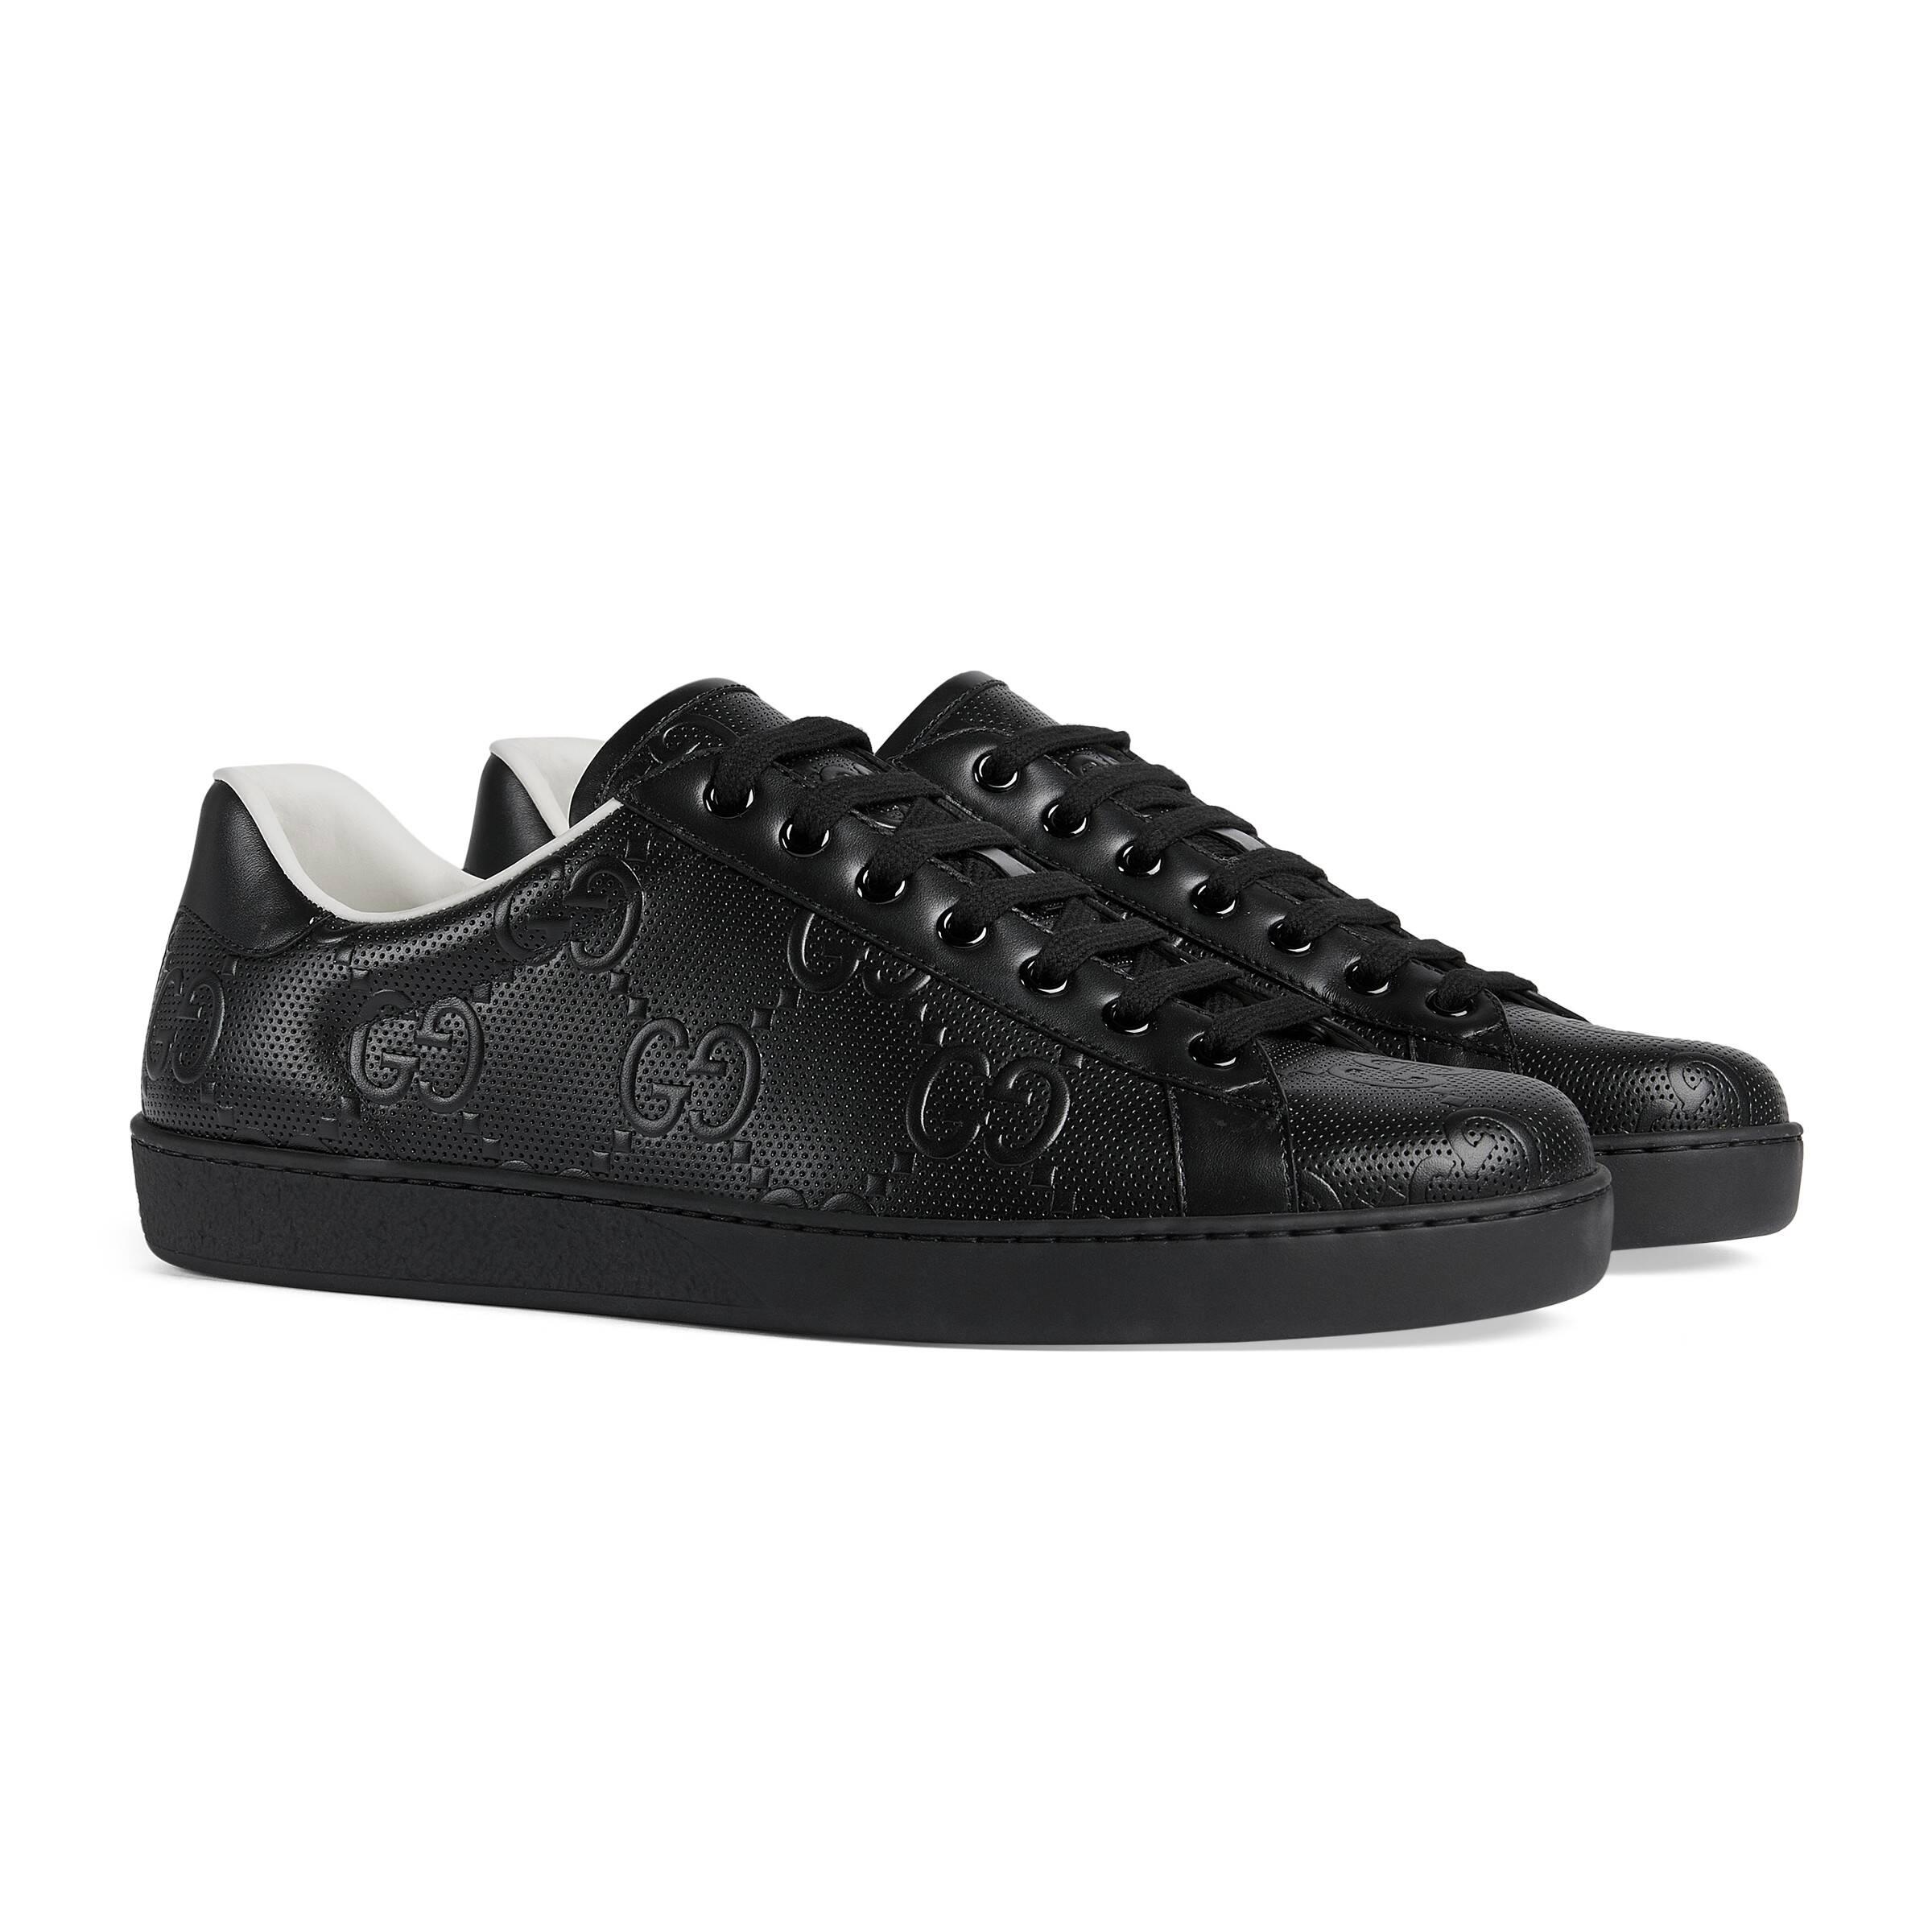 Gucci Ace GG Embossed Sneaker in Black for Men - Lyst